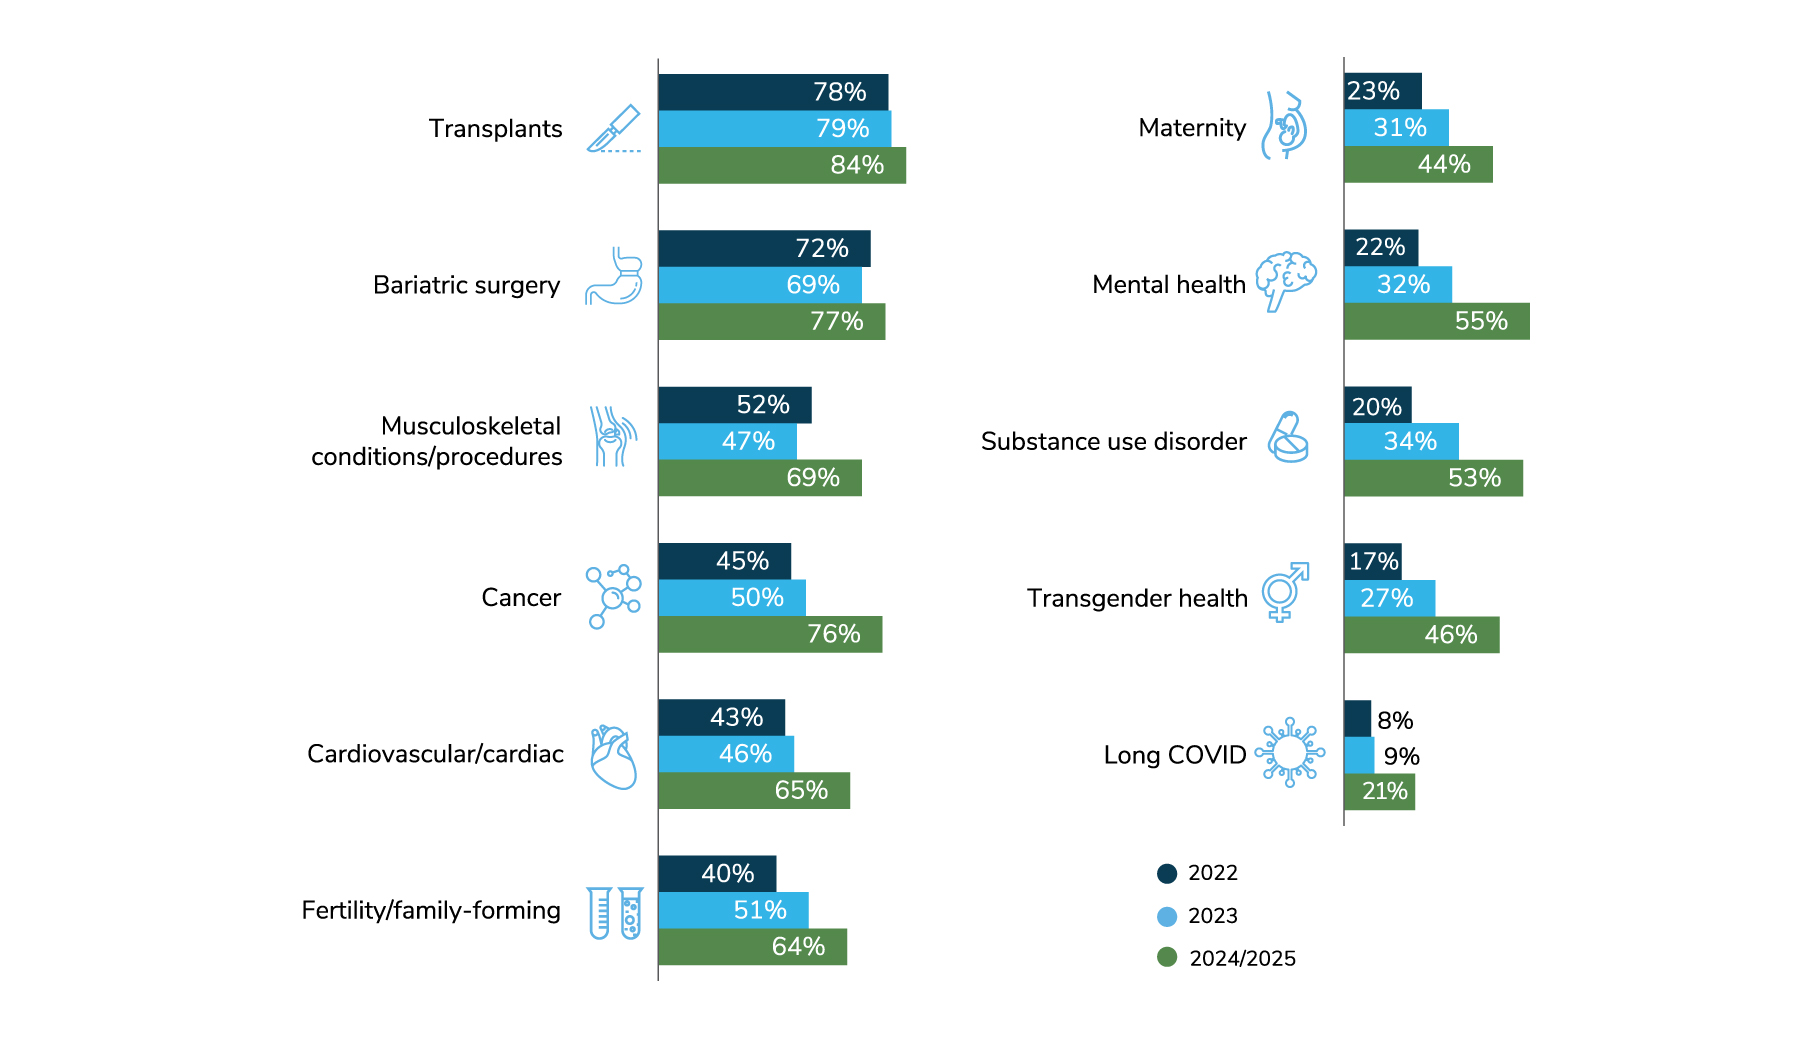 In 2023, the most common COEs will be for transplants (70%), bariatric surgery (69%), musculoskeletal procedures (47%), cancer (50%), cardiovascular (46%) and fertility/family-forming (51%).